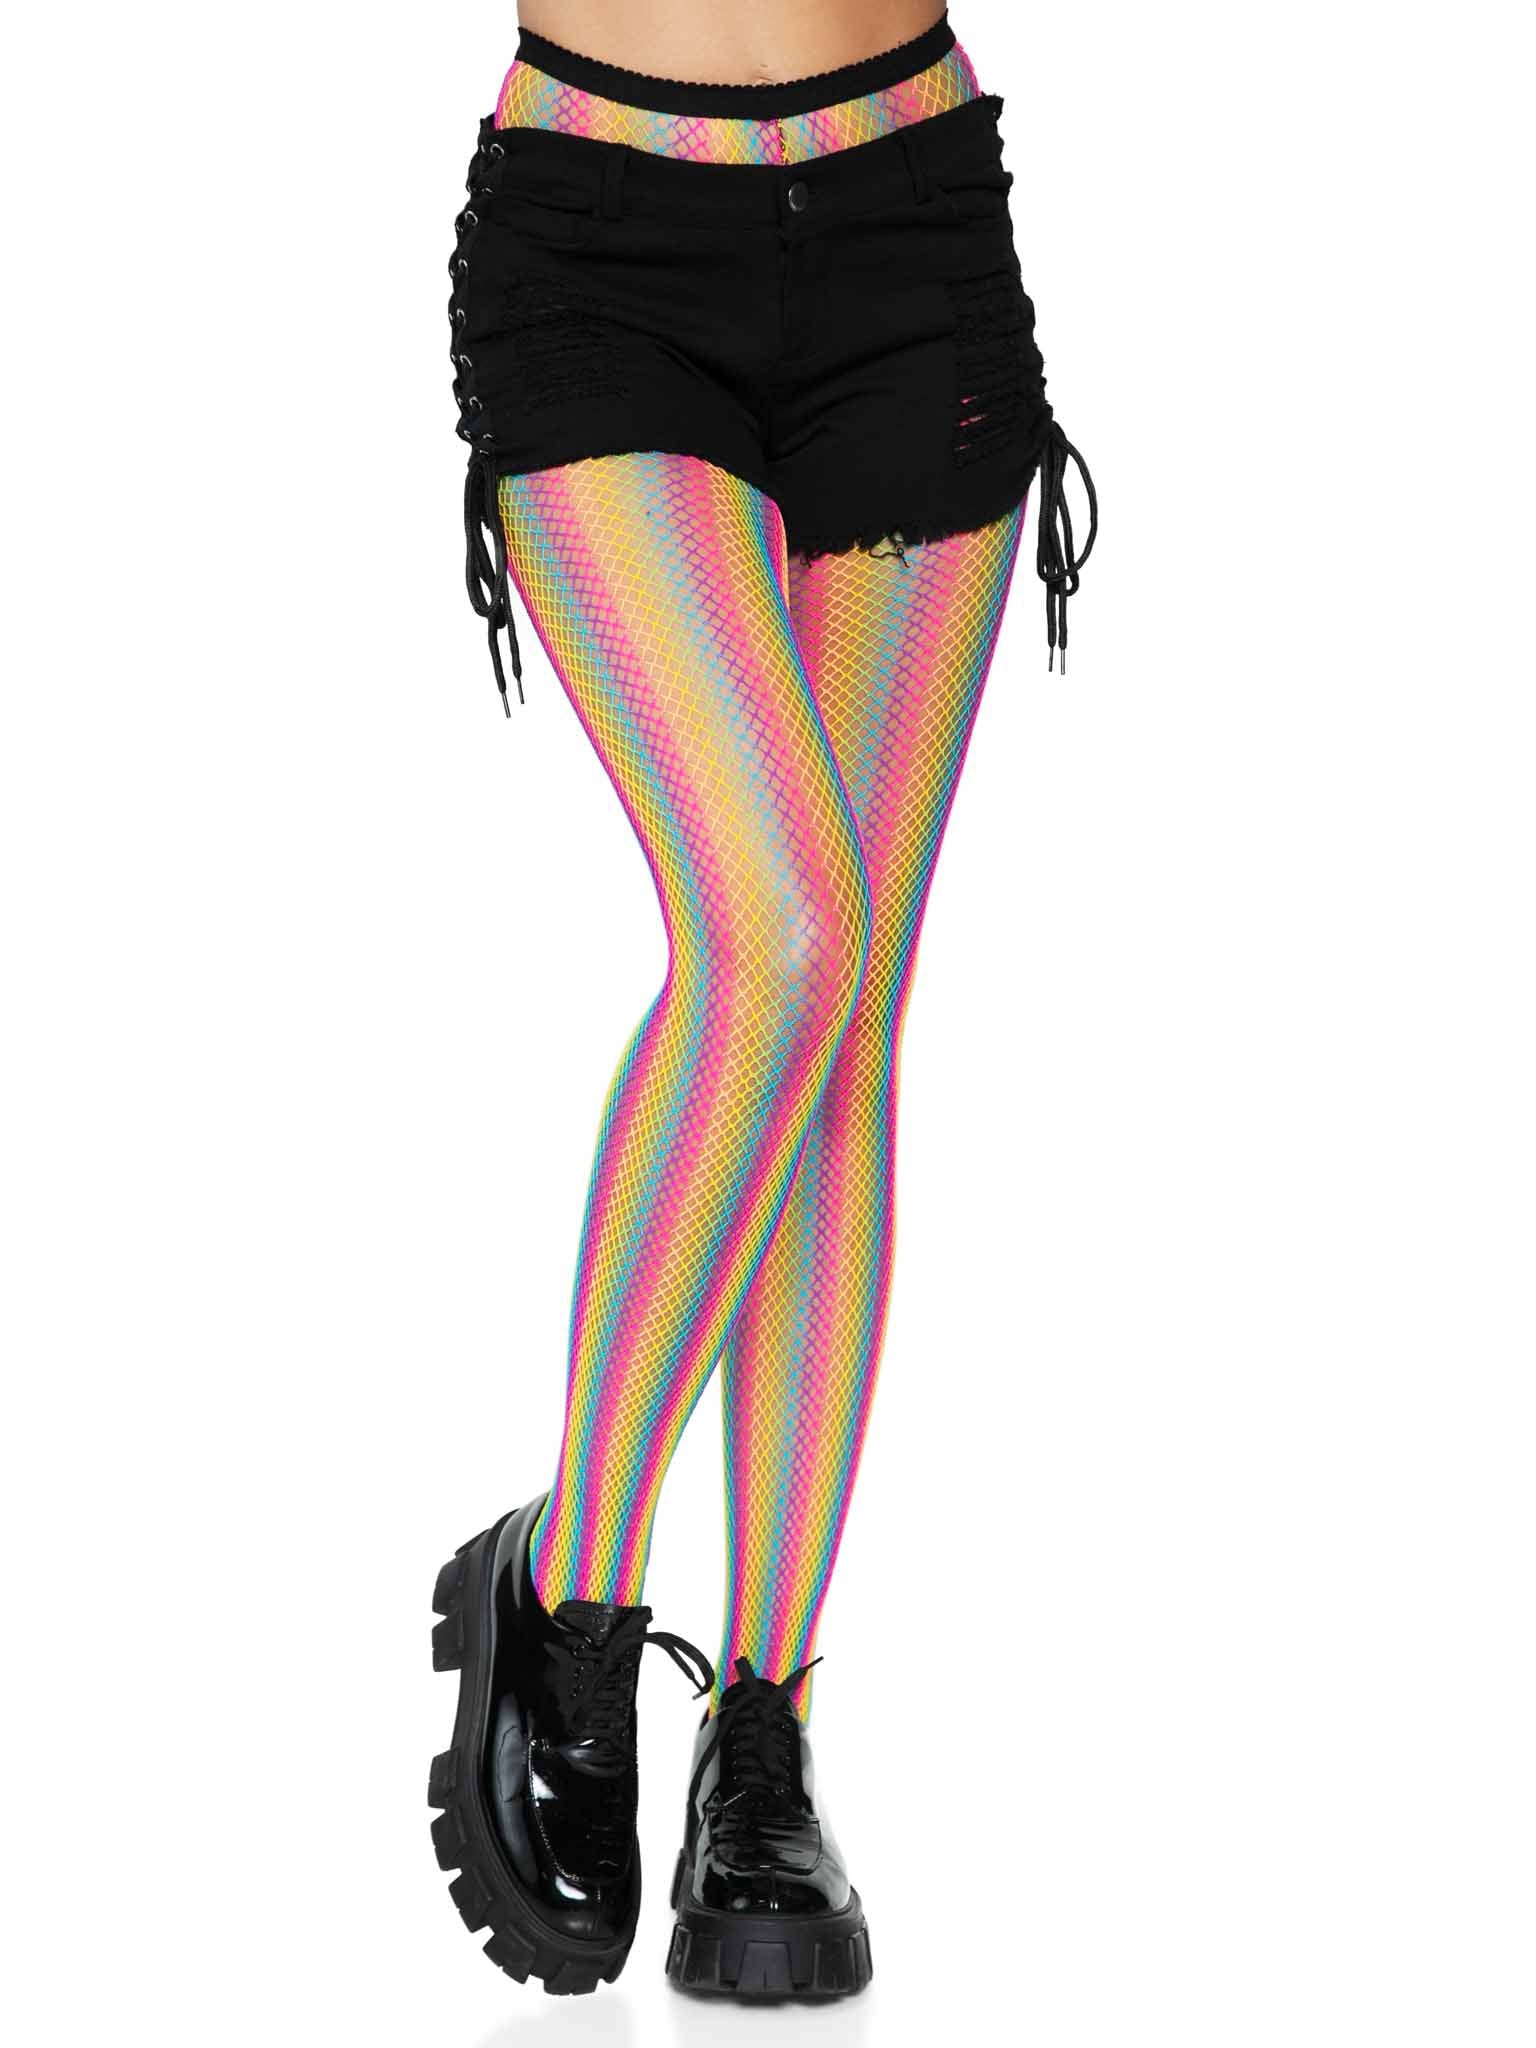 Neon Rainbow Striped Fishnet Tights - One Size -  Multicolor-2